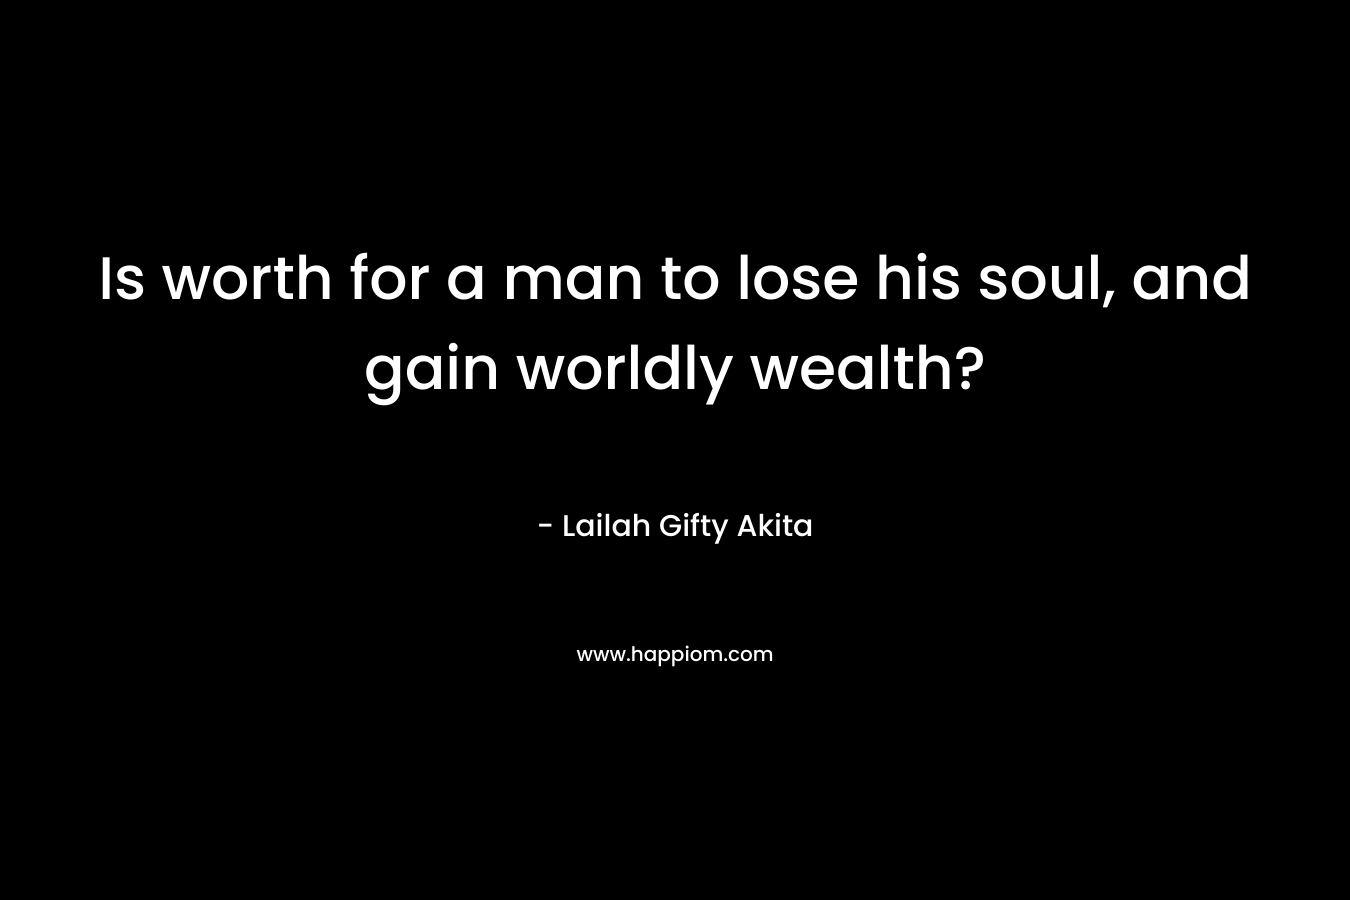 Is worth for a man to lose his soul, and gain worldly wealth?